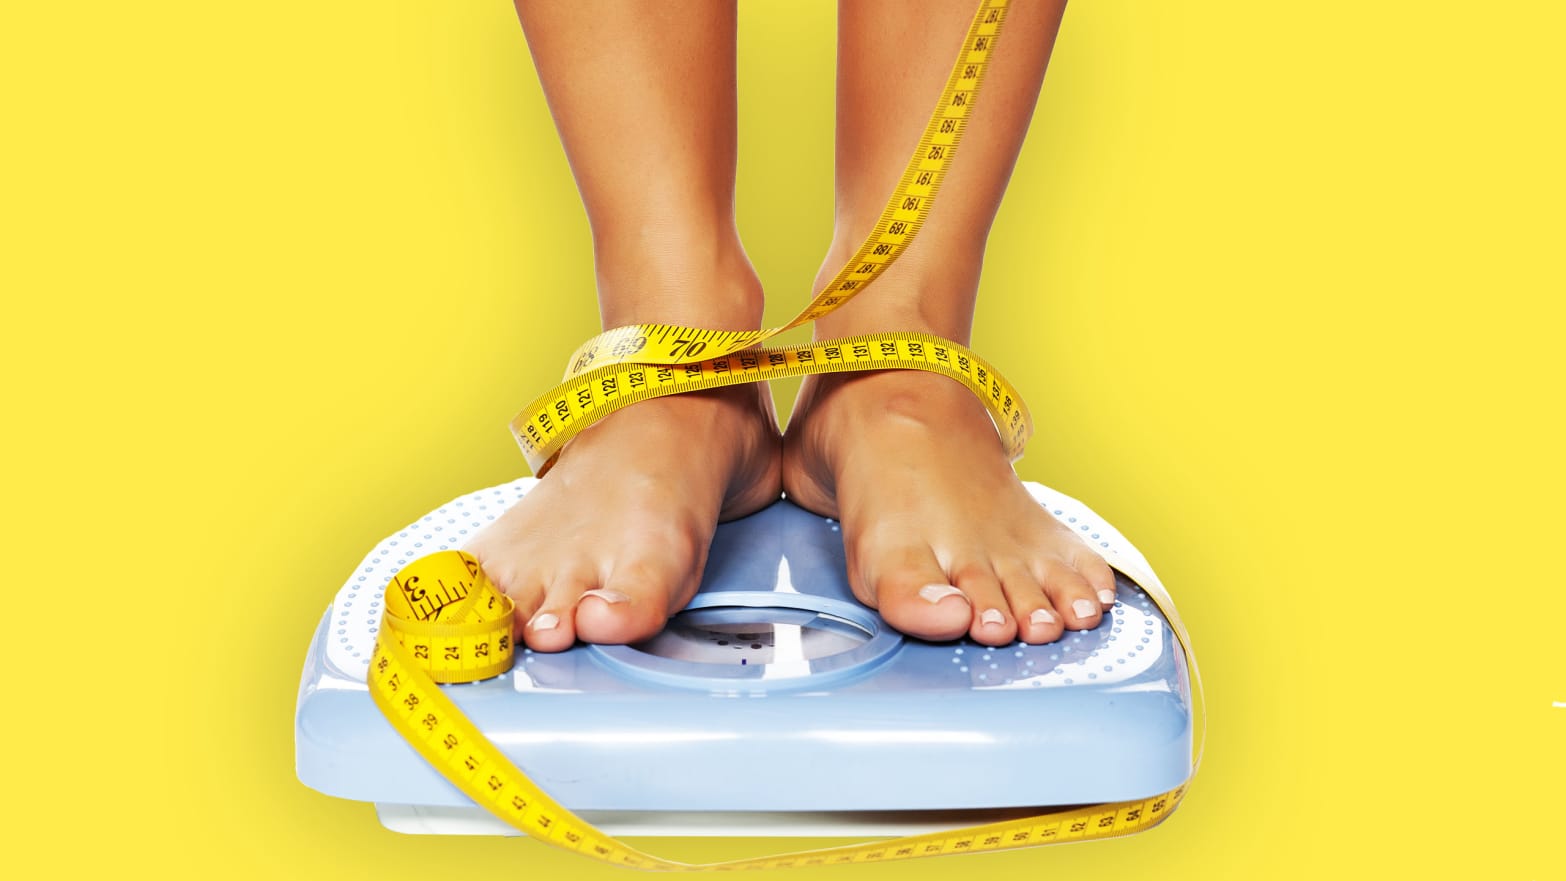 How America's Diet Culture Hinders Those With Eating Disorders